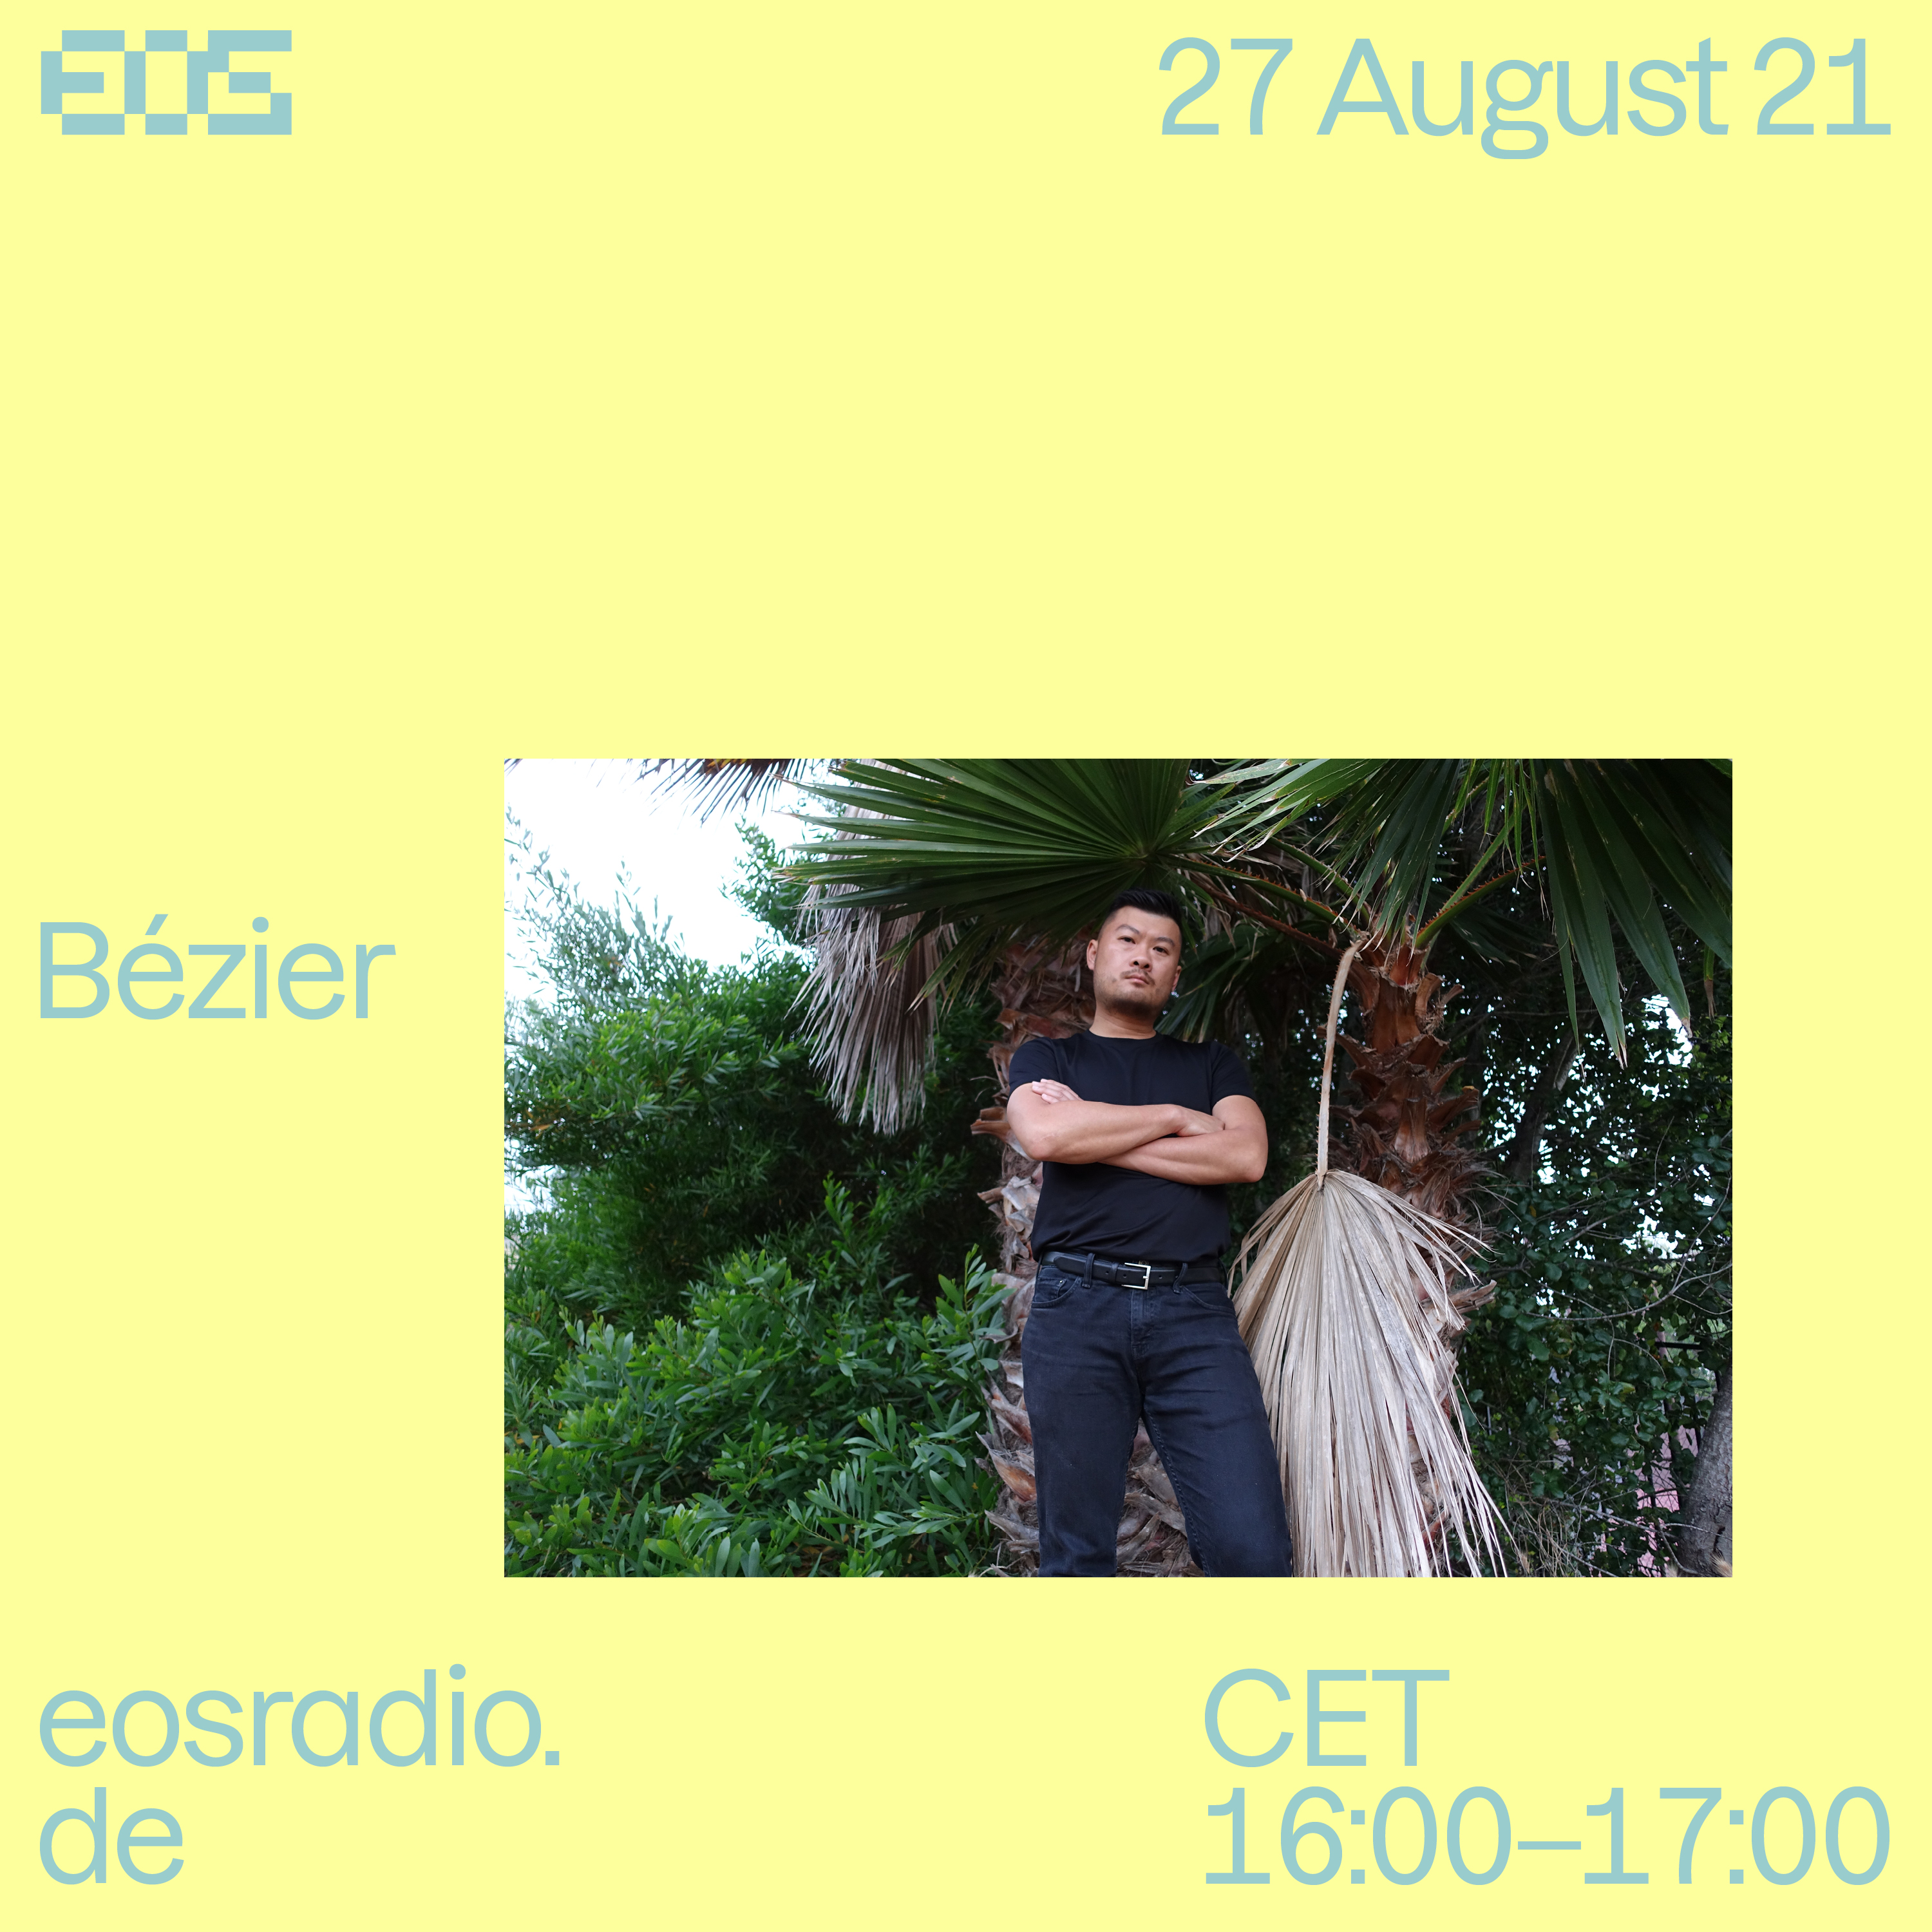 Image for Frankfurt based radio station eosradio.de for monthly Bézier Residency August 2021